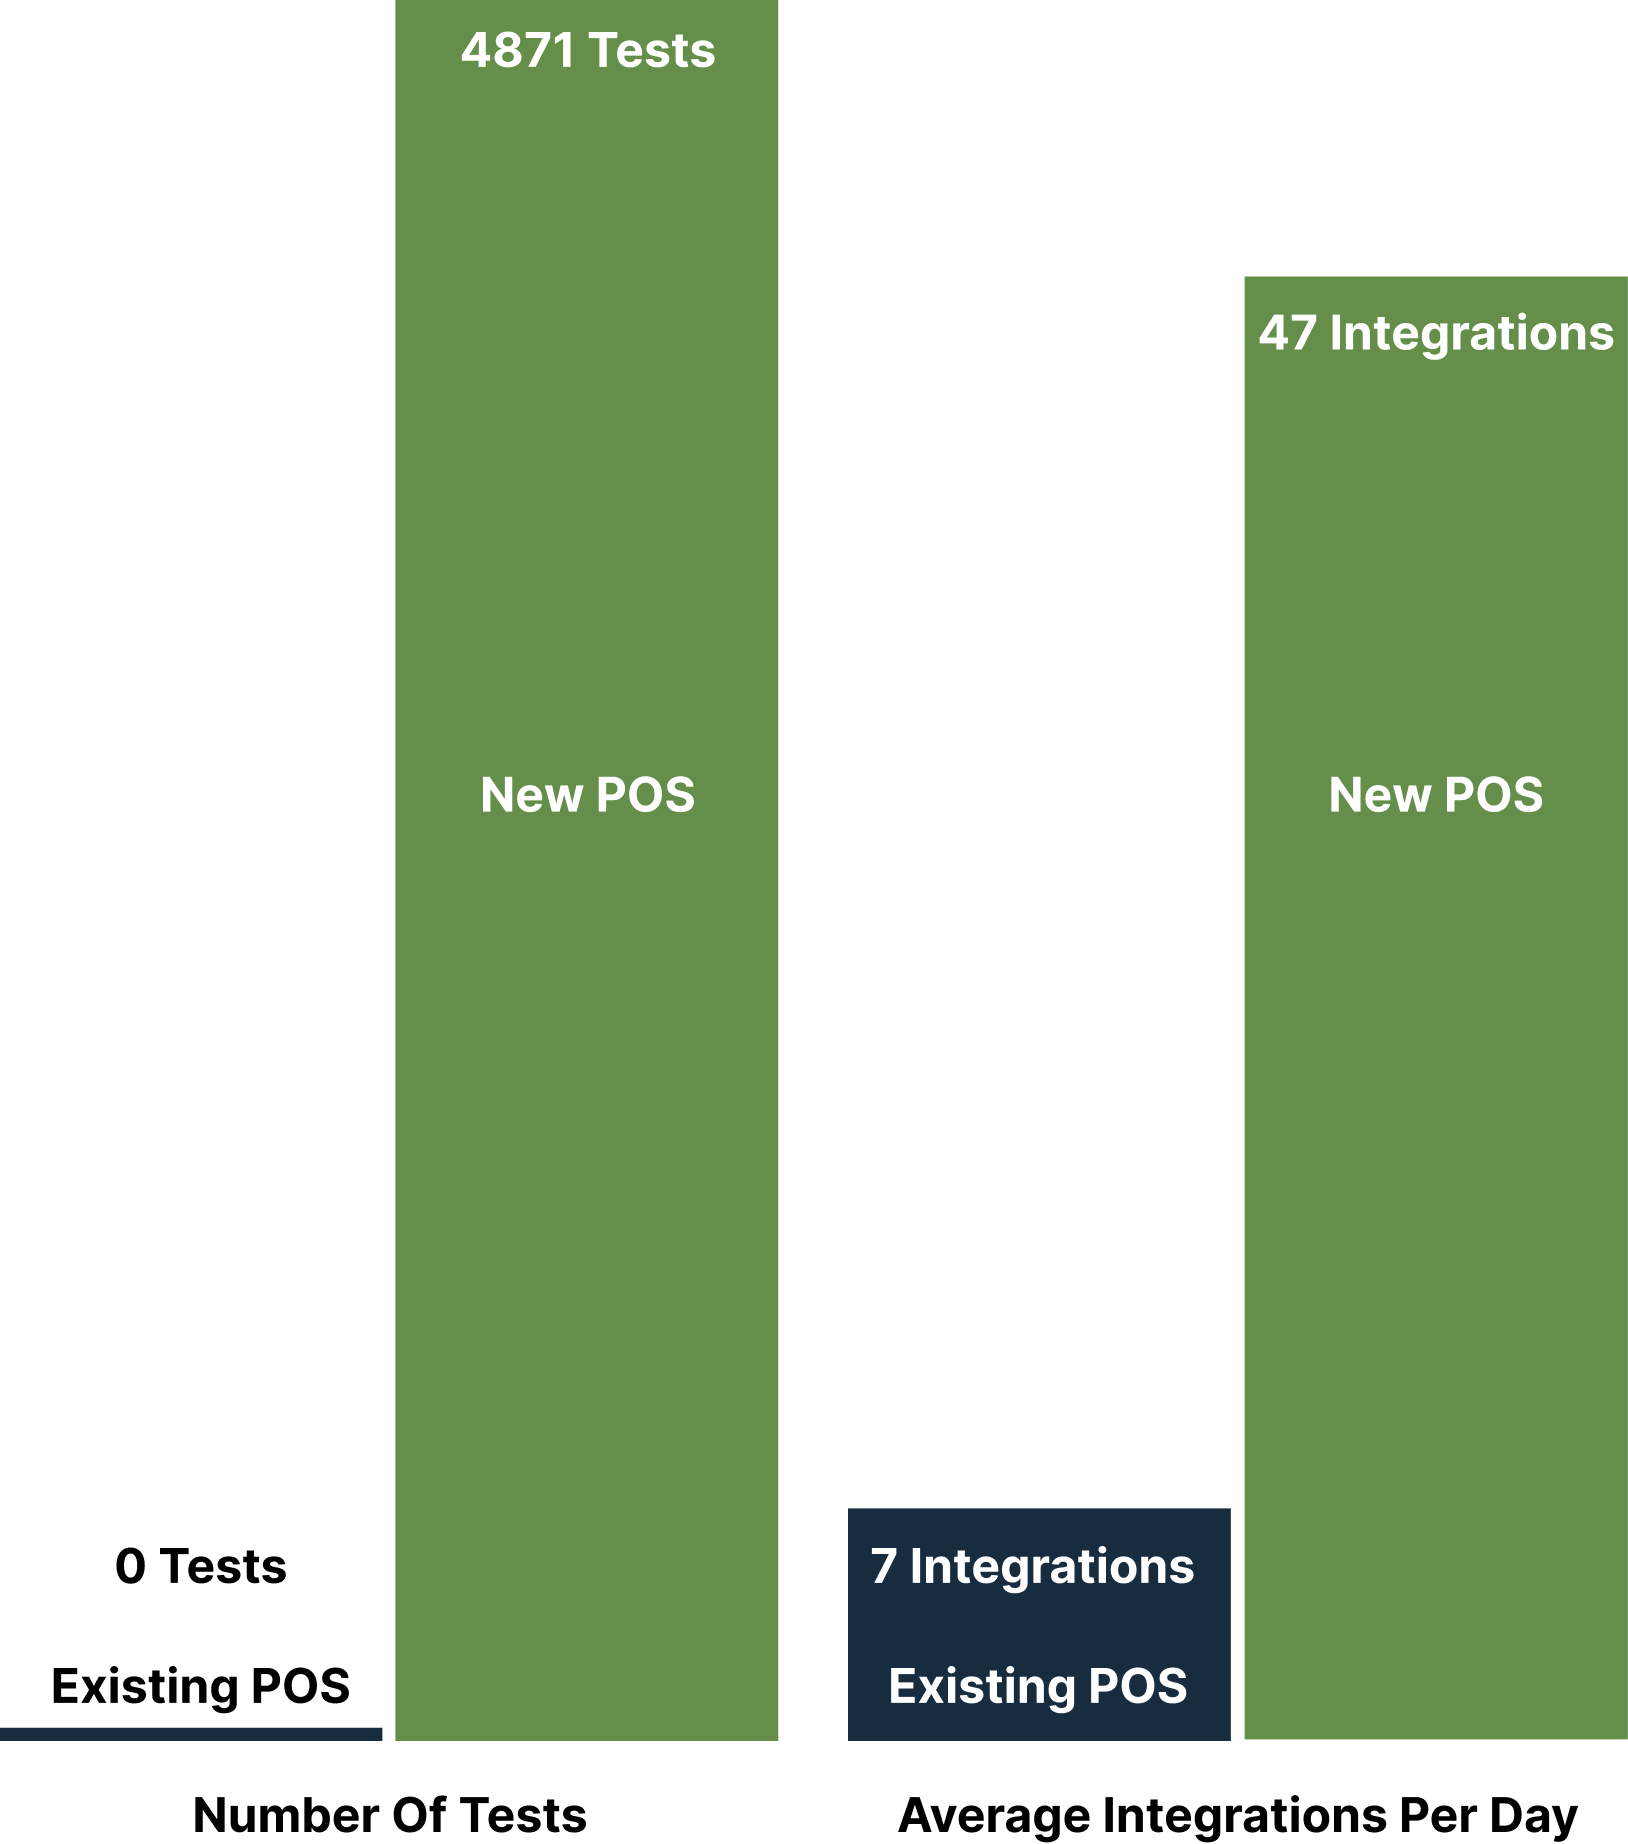 graph comparing the 0 tests in the old POS to the 4871 tests written for the new POS, along with the average of 7 daily integrations per day in the old POS compared to the 47 integrations per day in the new POS